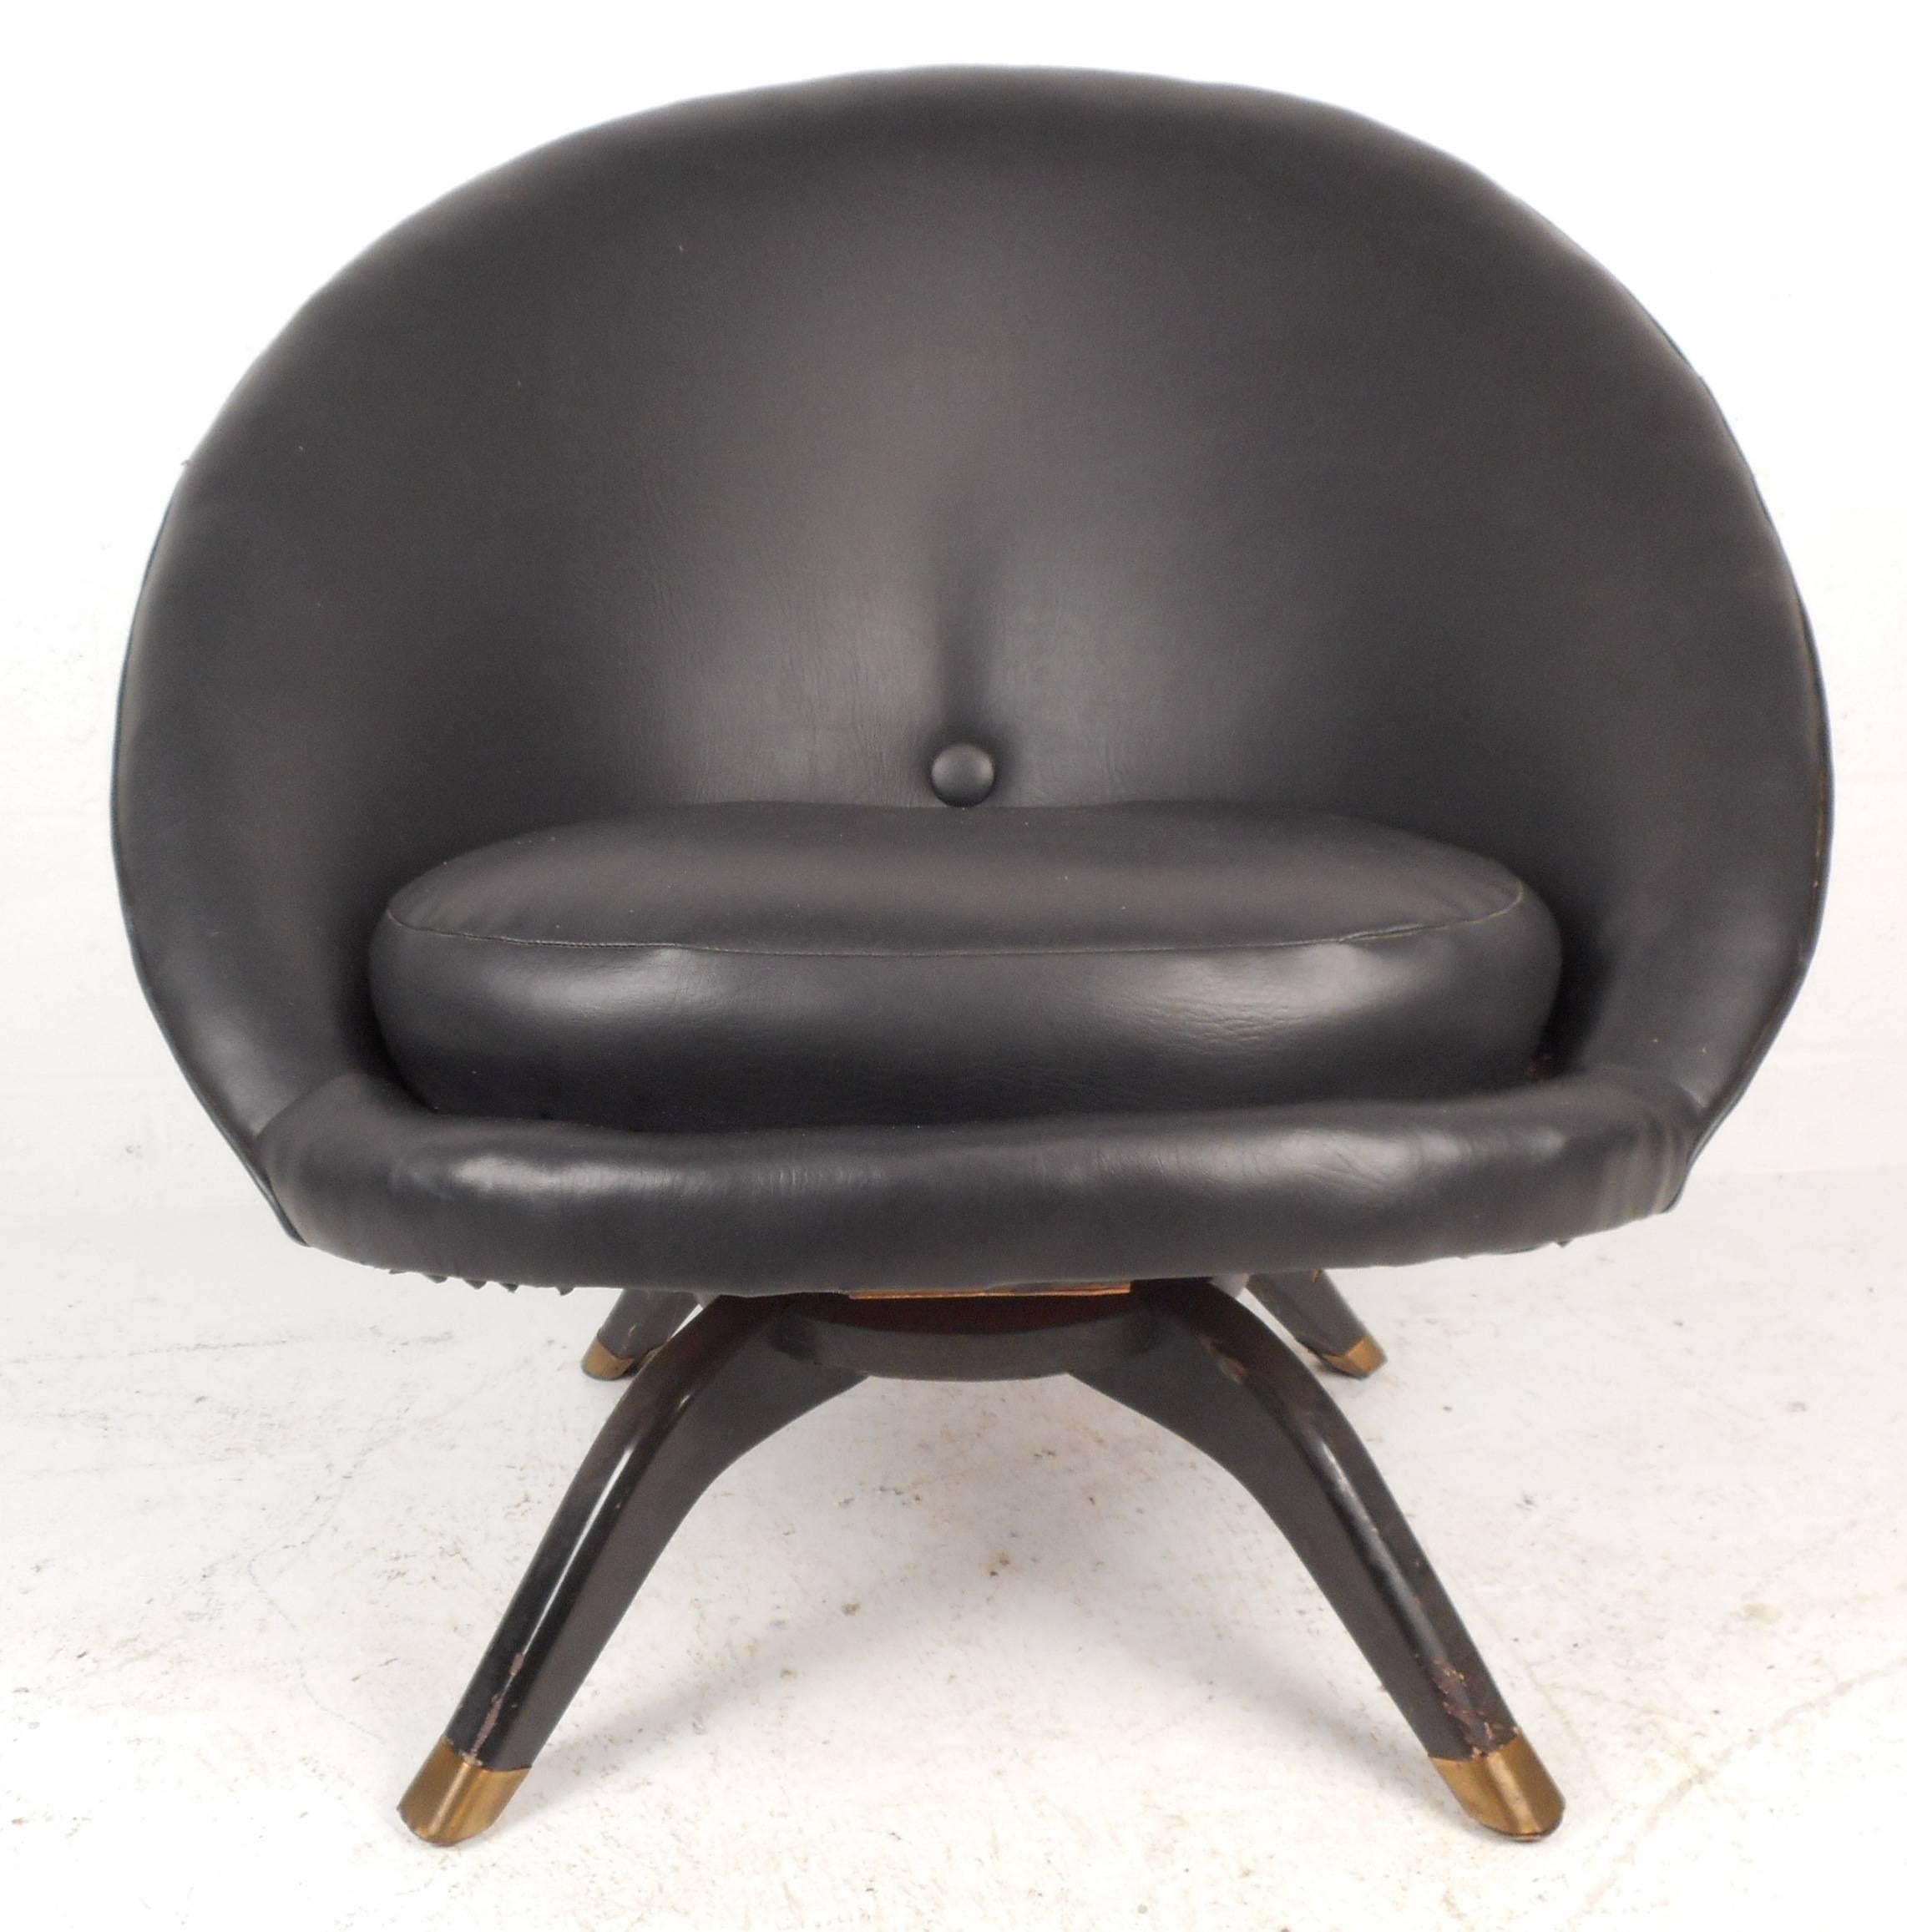 Lovely vintage modern pod chair features vinyl upholstery, swivel state, sculpted wood legs with brass capped feet, and a unique shapeld design. The thick cushion and wide seating are sure to add style and comfort in any modern interior. Please